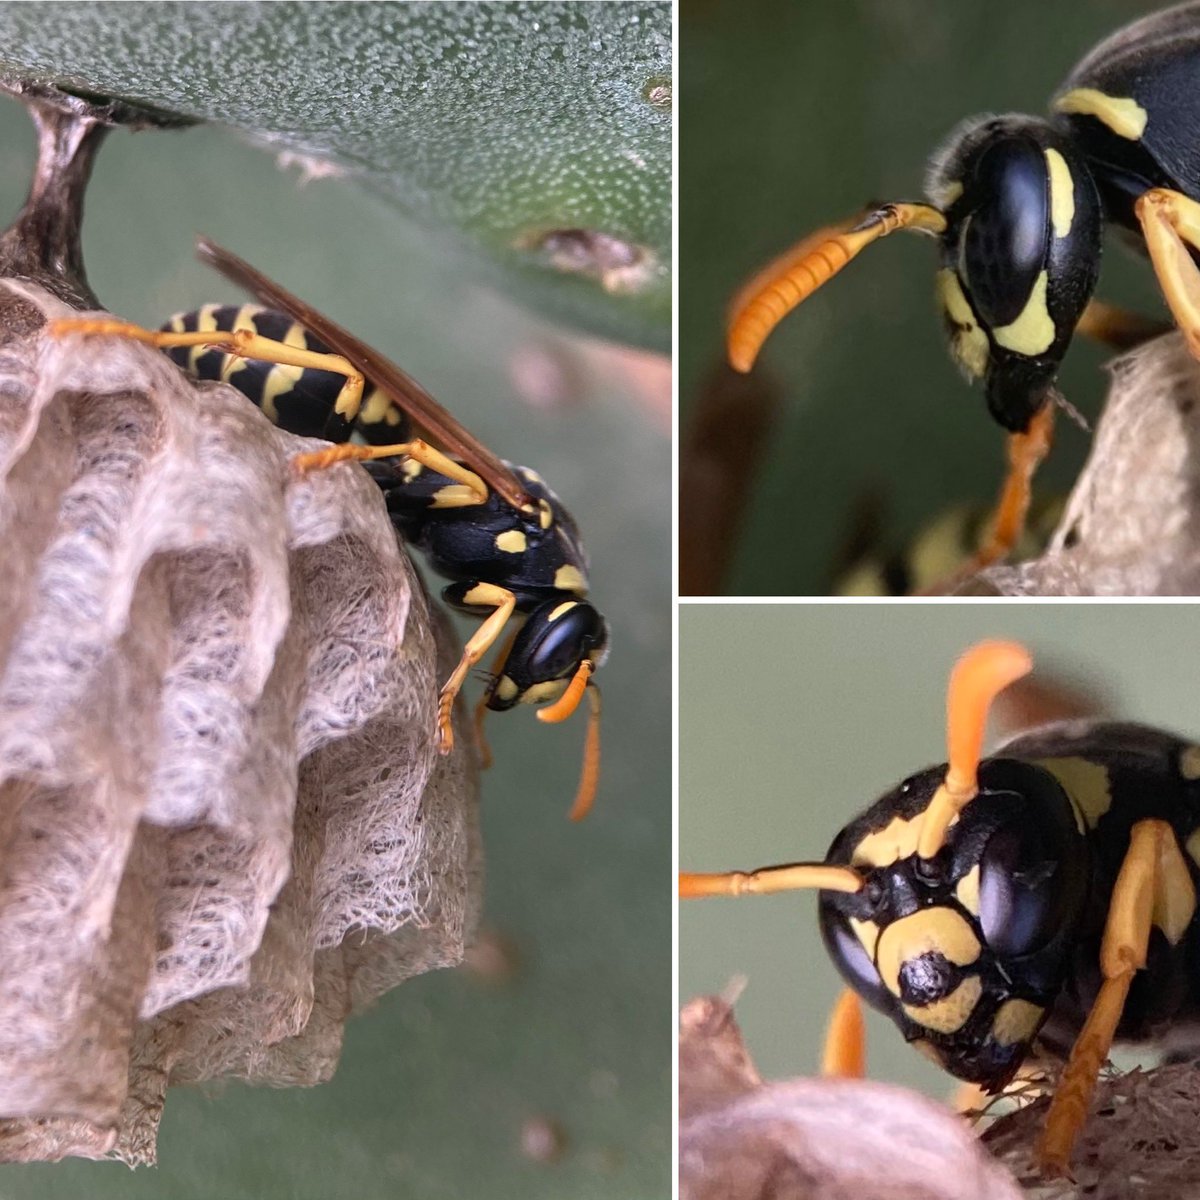 The beautiful Paper Wasp, on the equally beautiful structure it’s created on a Prickly Pear … still posting photos from Malta 😁 #wasp #insect #malta